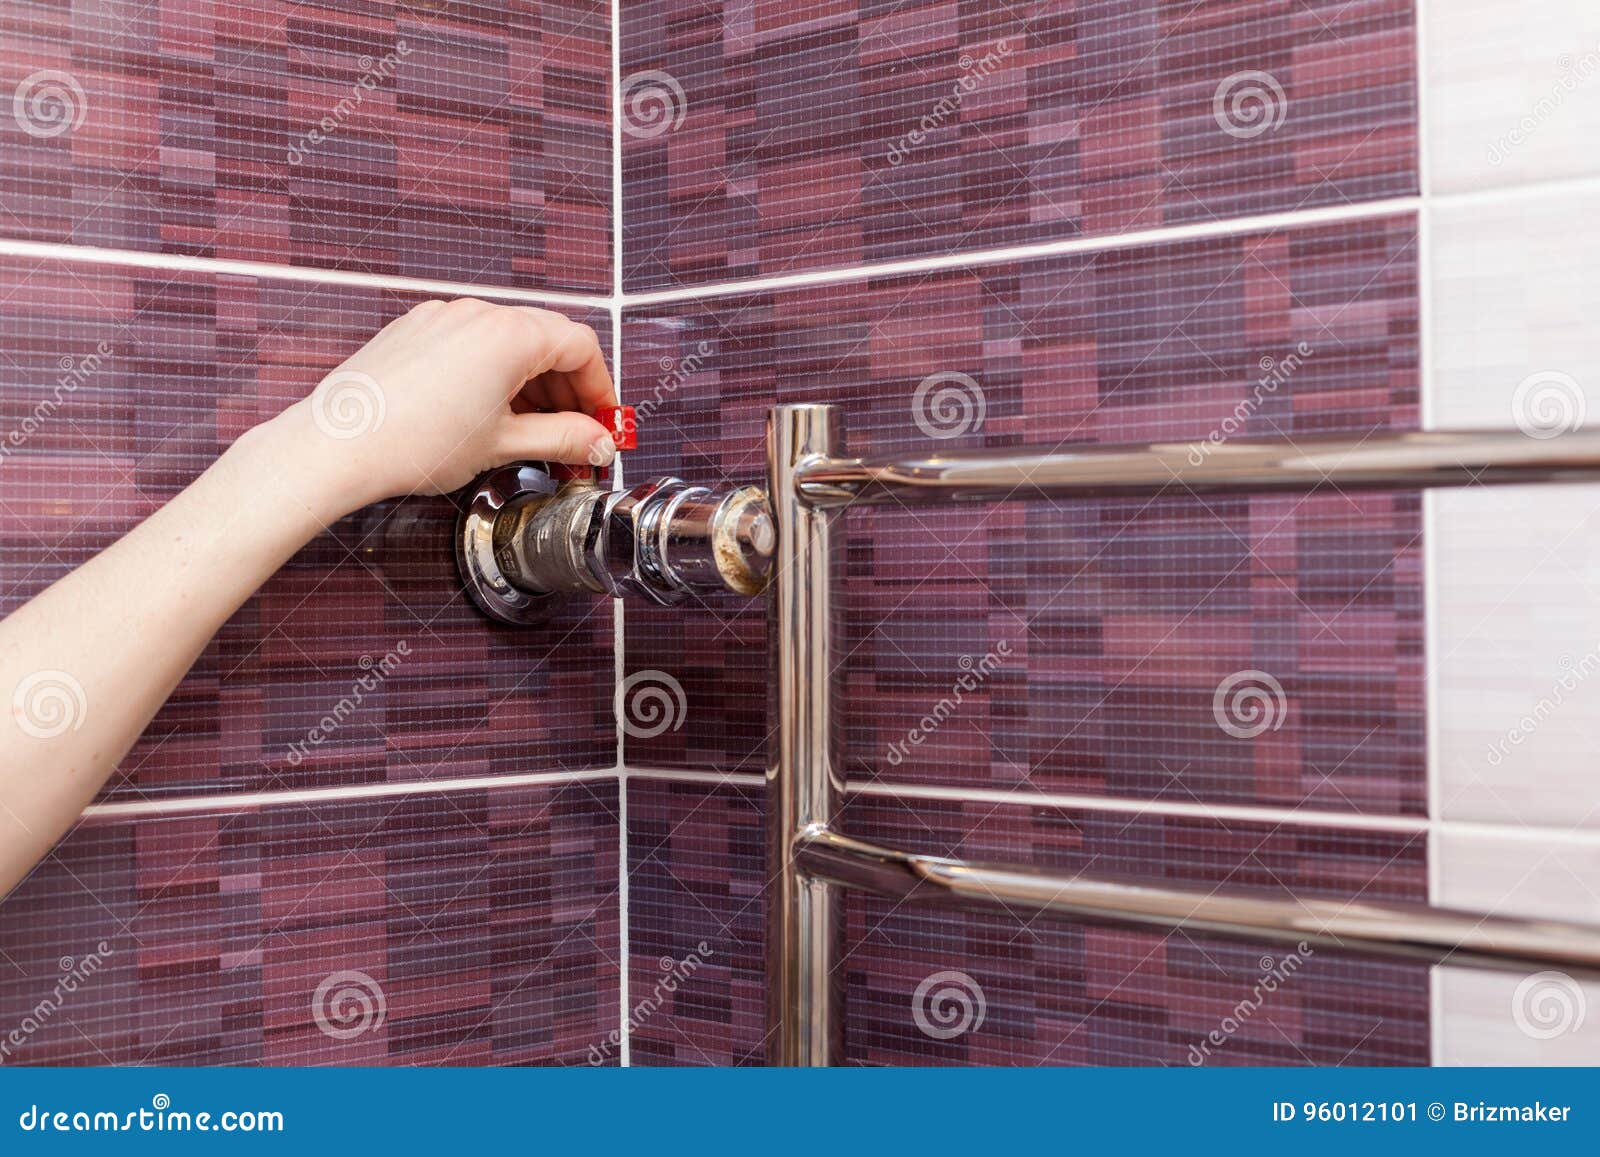 the girl hand regulates the water tap in the heated towel rail.